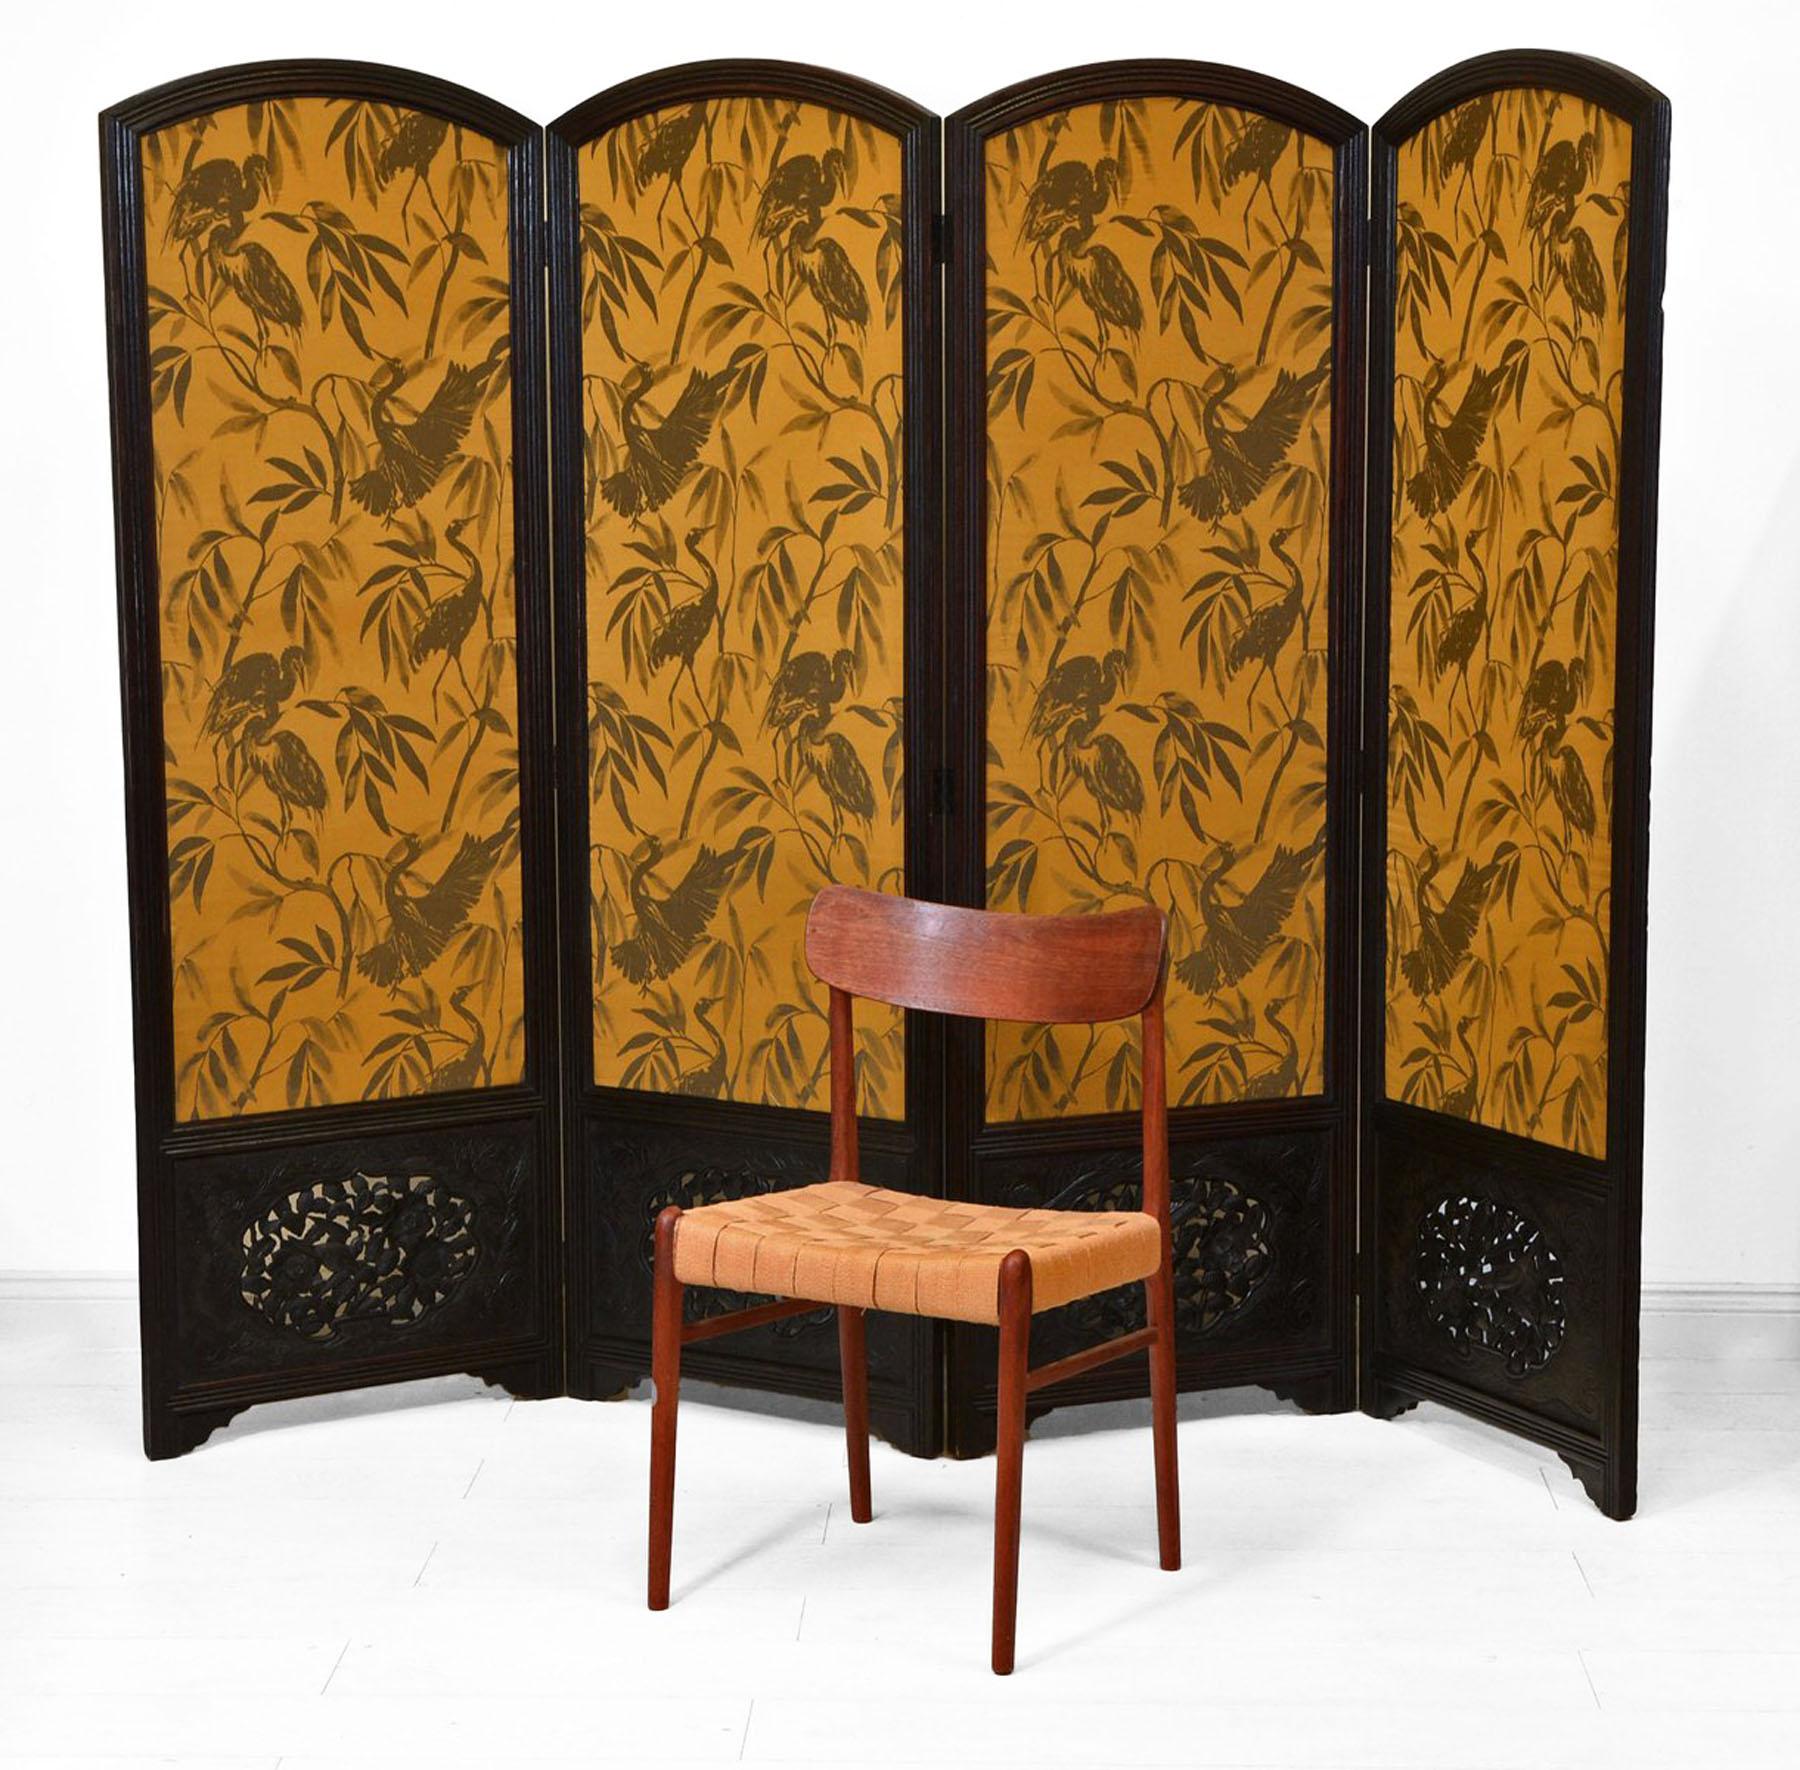 An antique large solid oak-framed four-fold screen with carved detail panels featuring birds and foliage. Circa 1920.

The fabric has been replaced with a vibrant Otori weave, featuring cranes perched among leaf fronds. 51% Polyester 25% Viscose